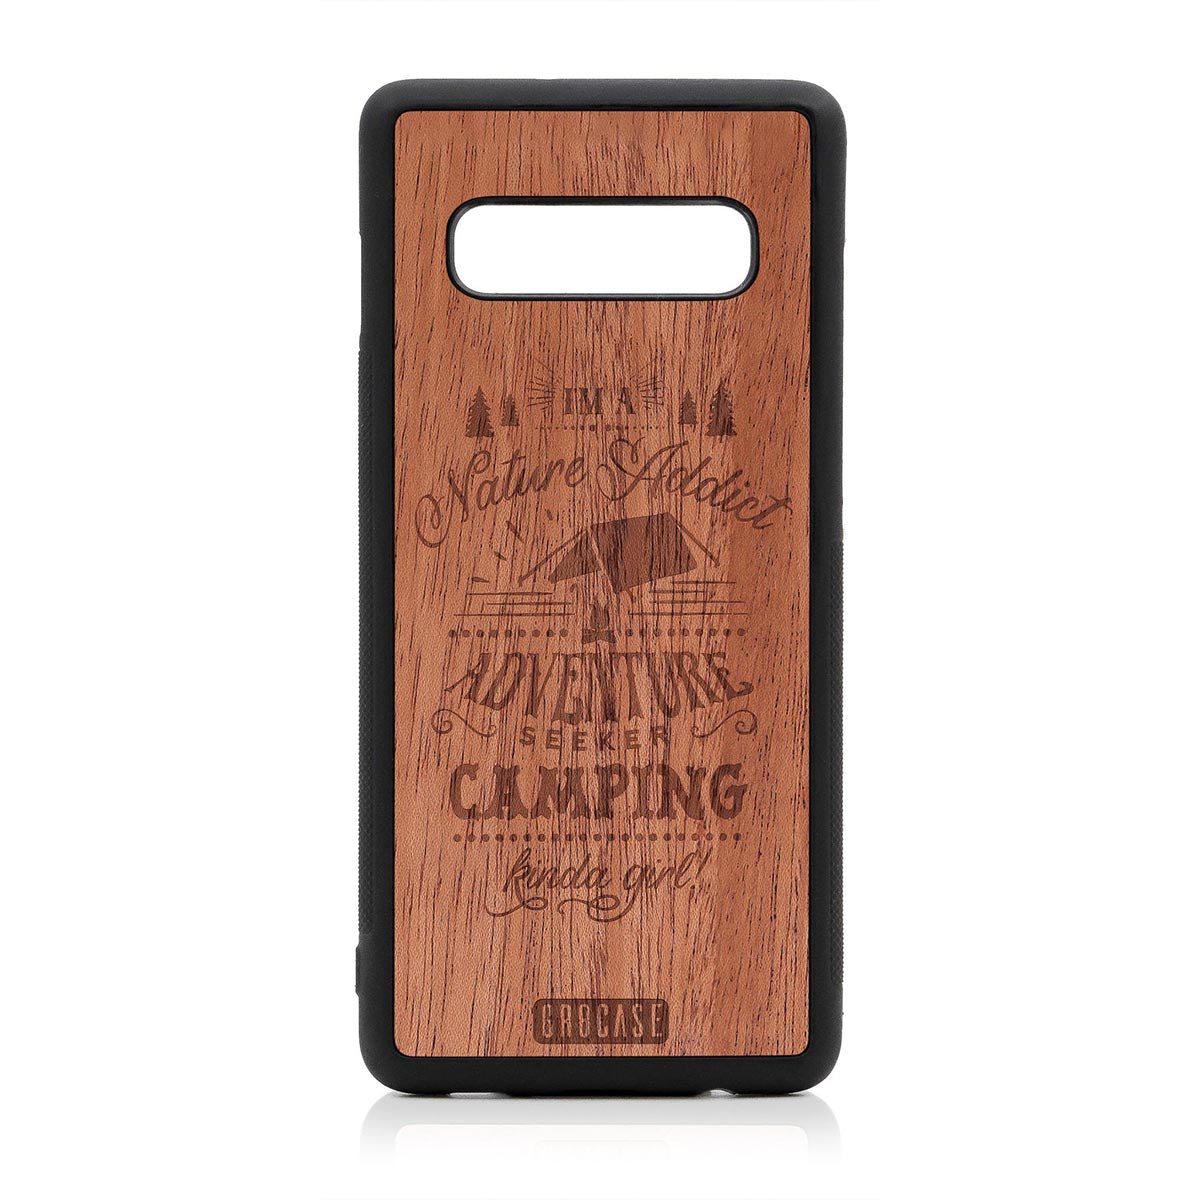 I'm A Nature Addict Adventure Seeker Camping Kinda Girl Design Wood Case Samsung Galaxy S10 Plus by GR8CASE